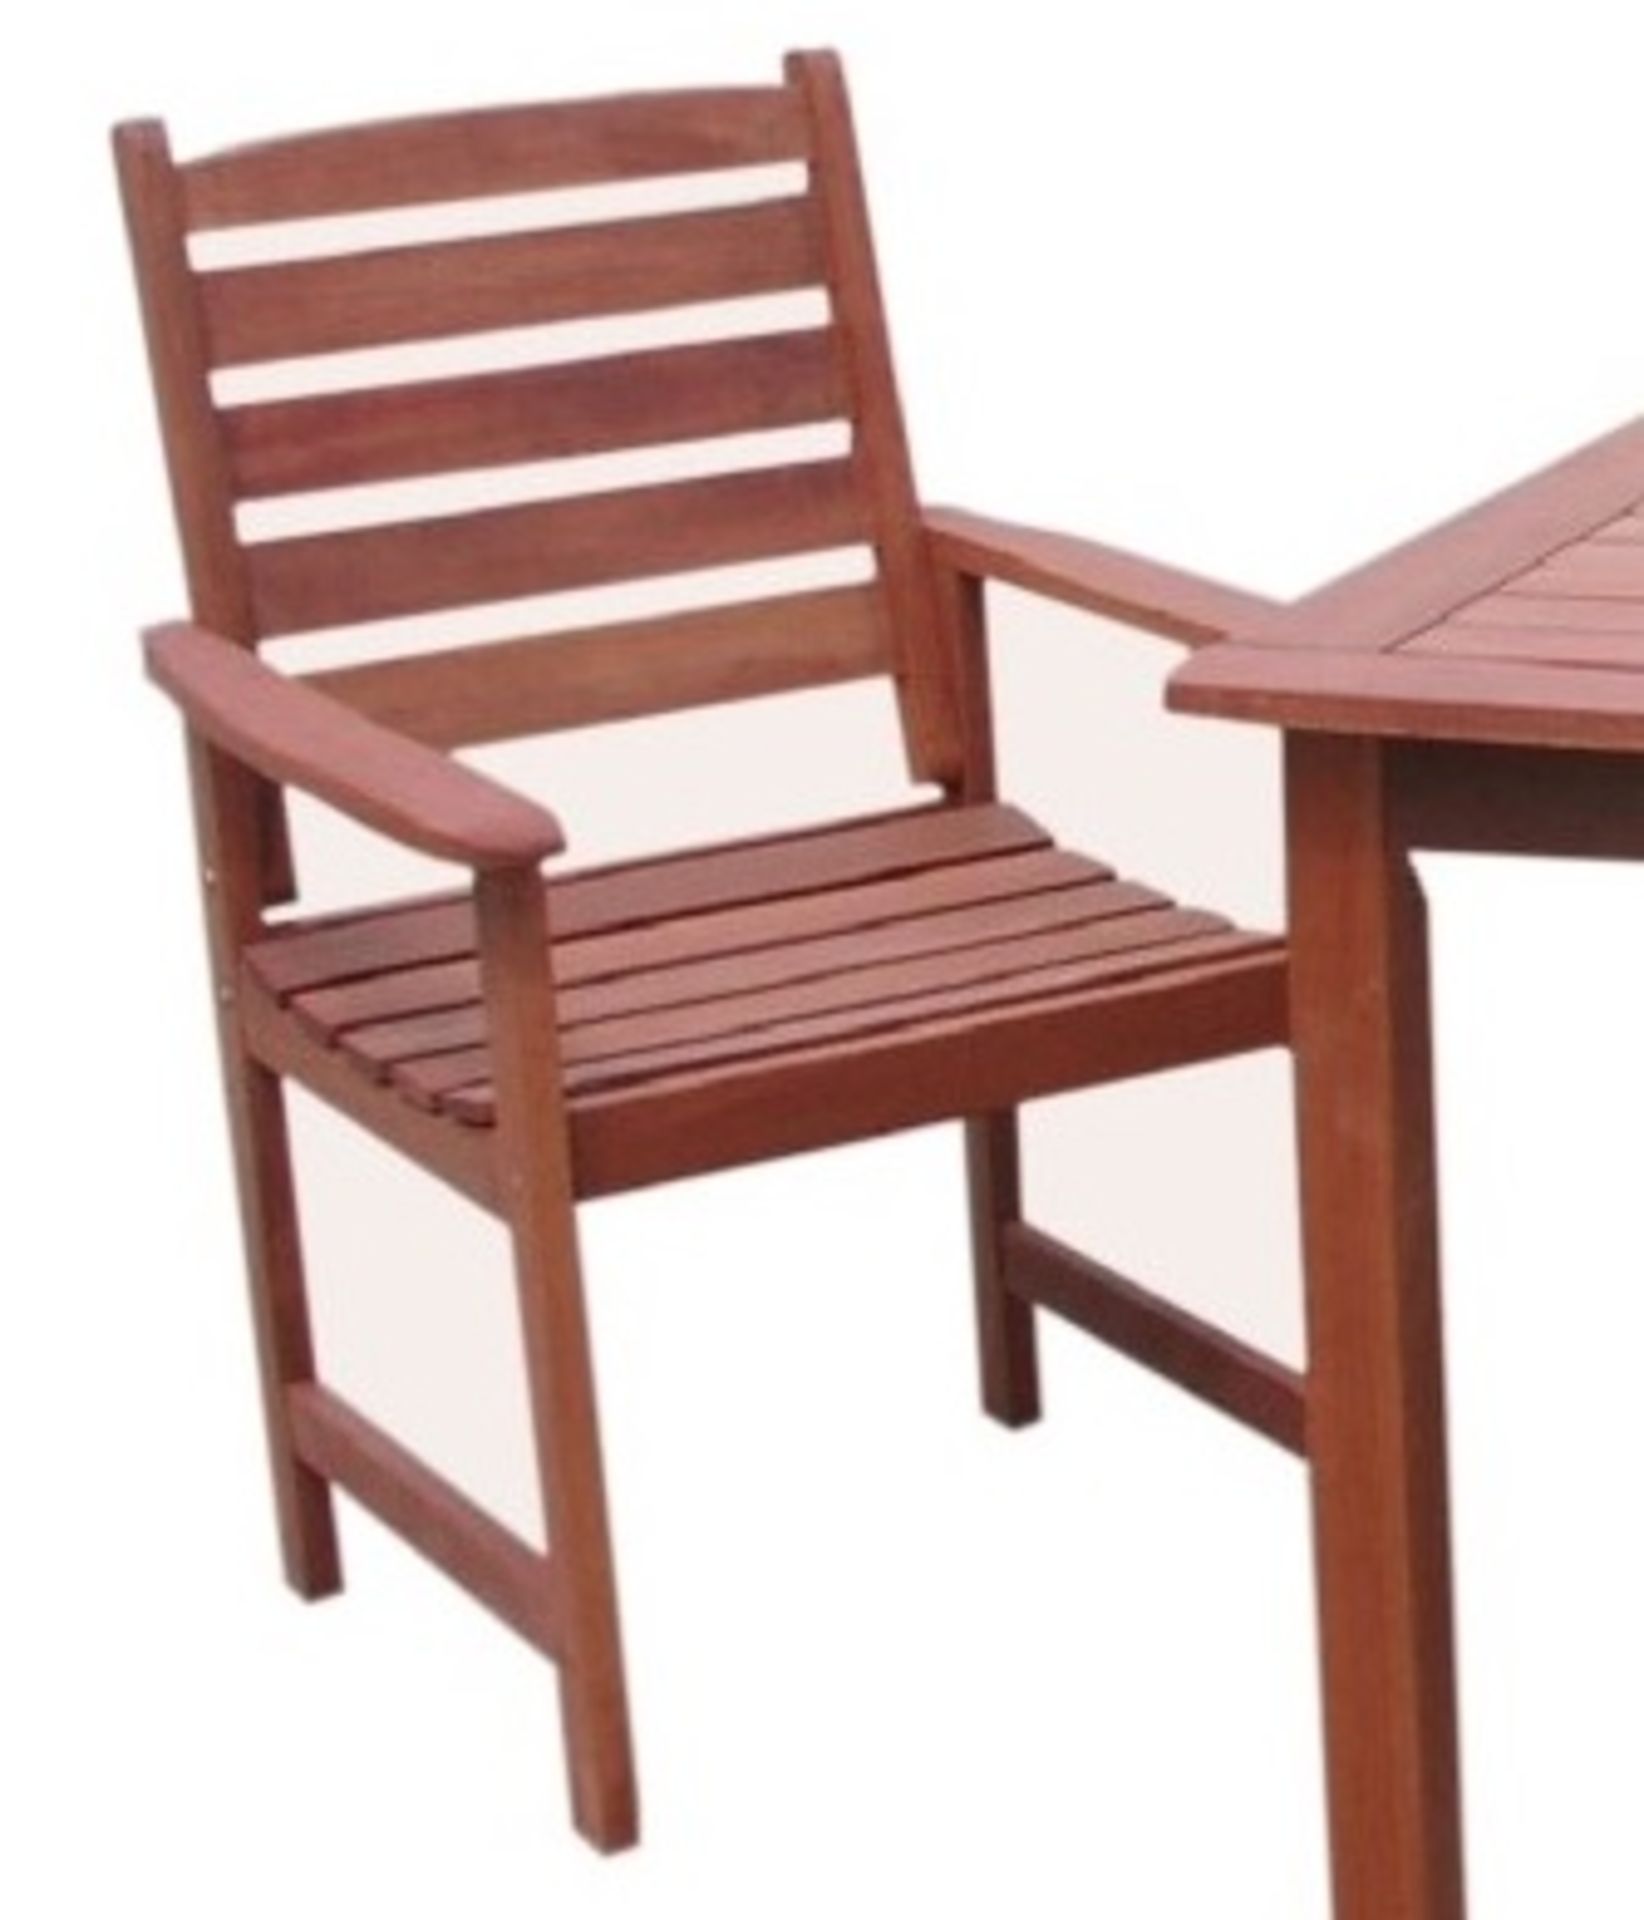 5-Piece Garden Furniture Set Includes 1 x Table Extending (Rectangular) & 4 x Armchairs - Made - Image 2 of 2